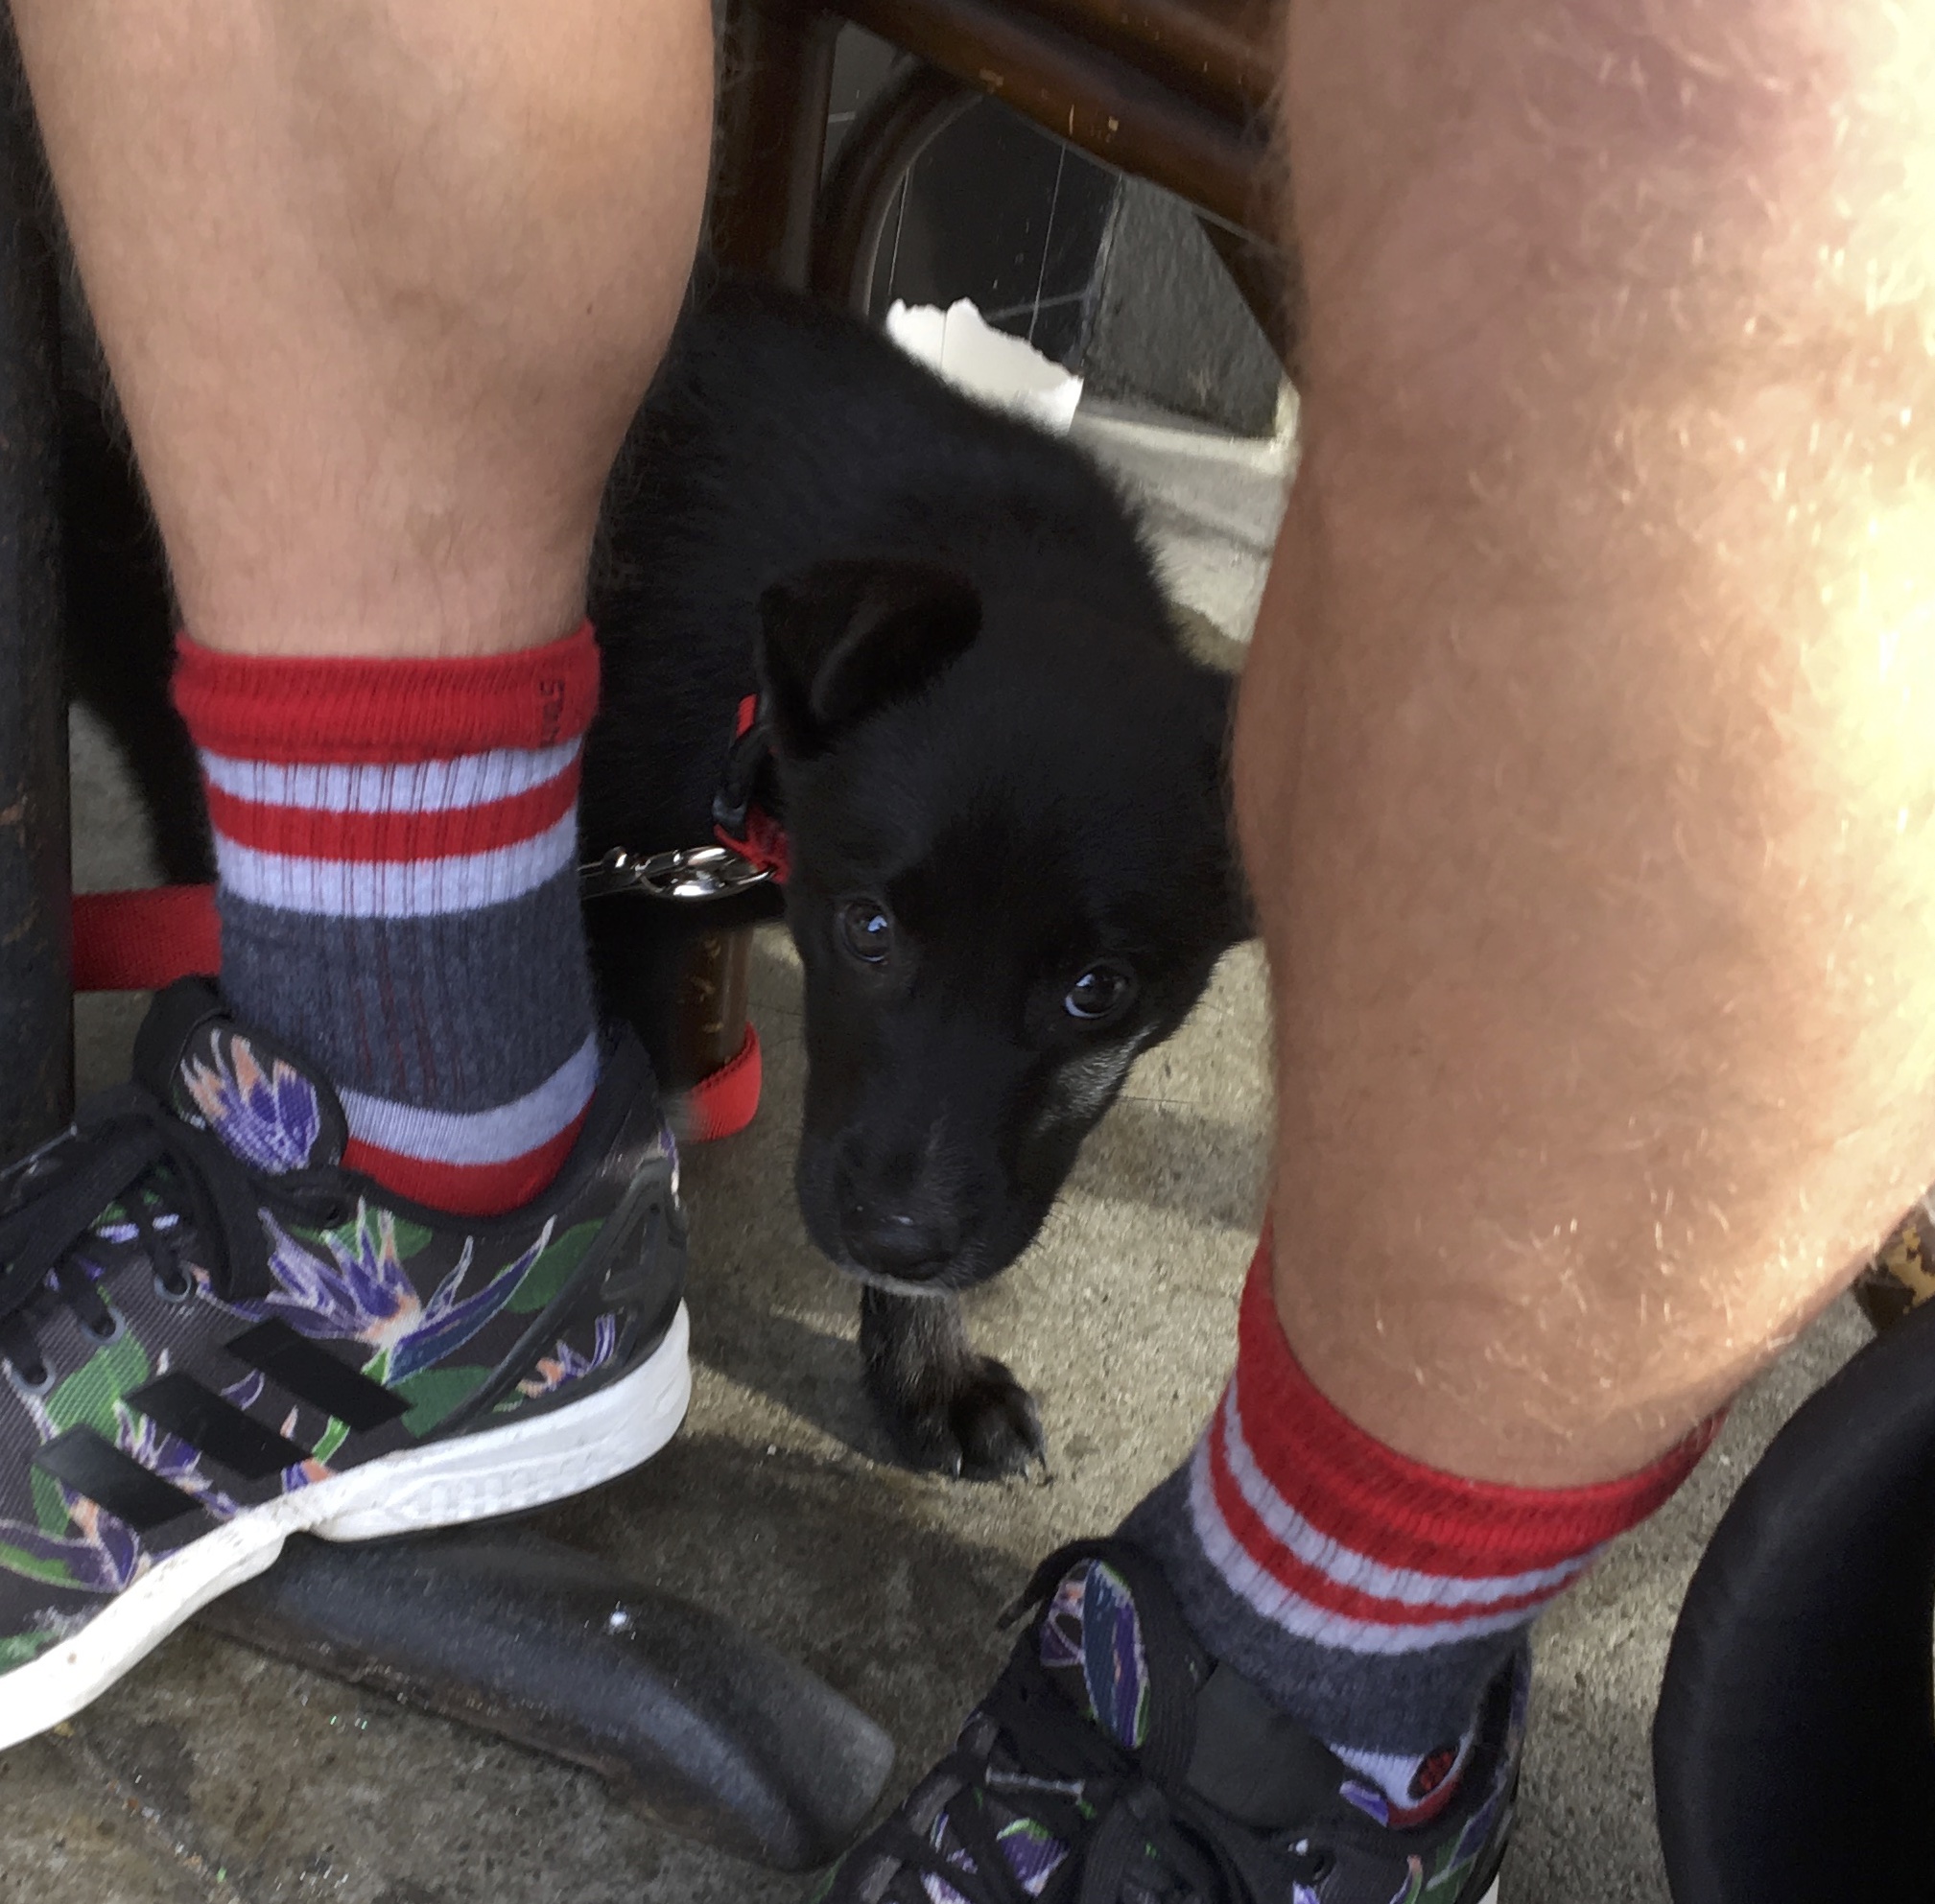 4 Week Old Black Border Collie Labrador Retriever Mix Peeking Out From Behind Man's Legs